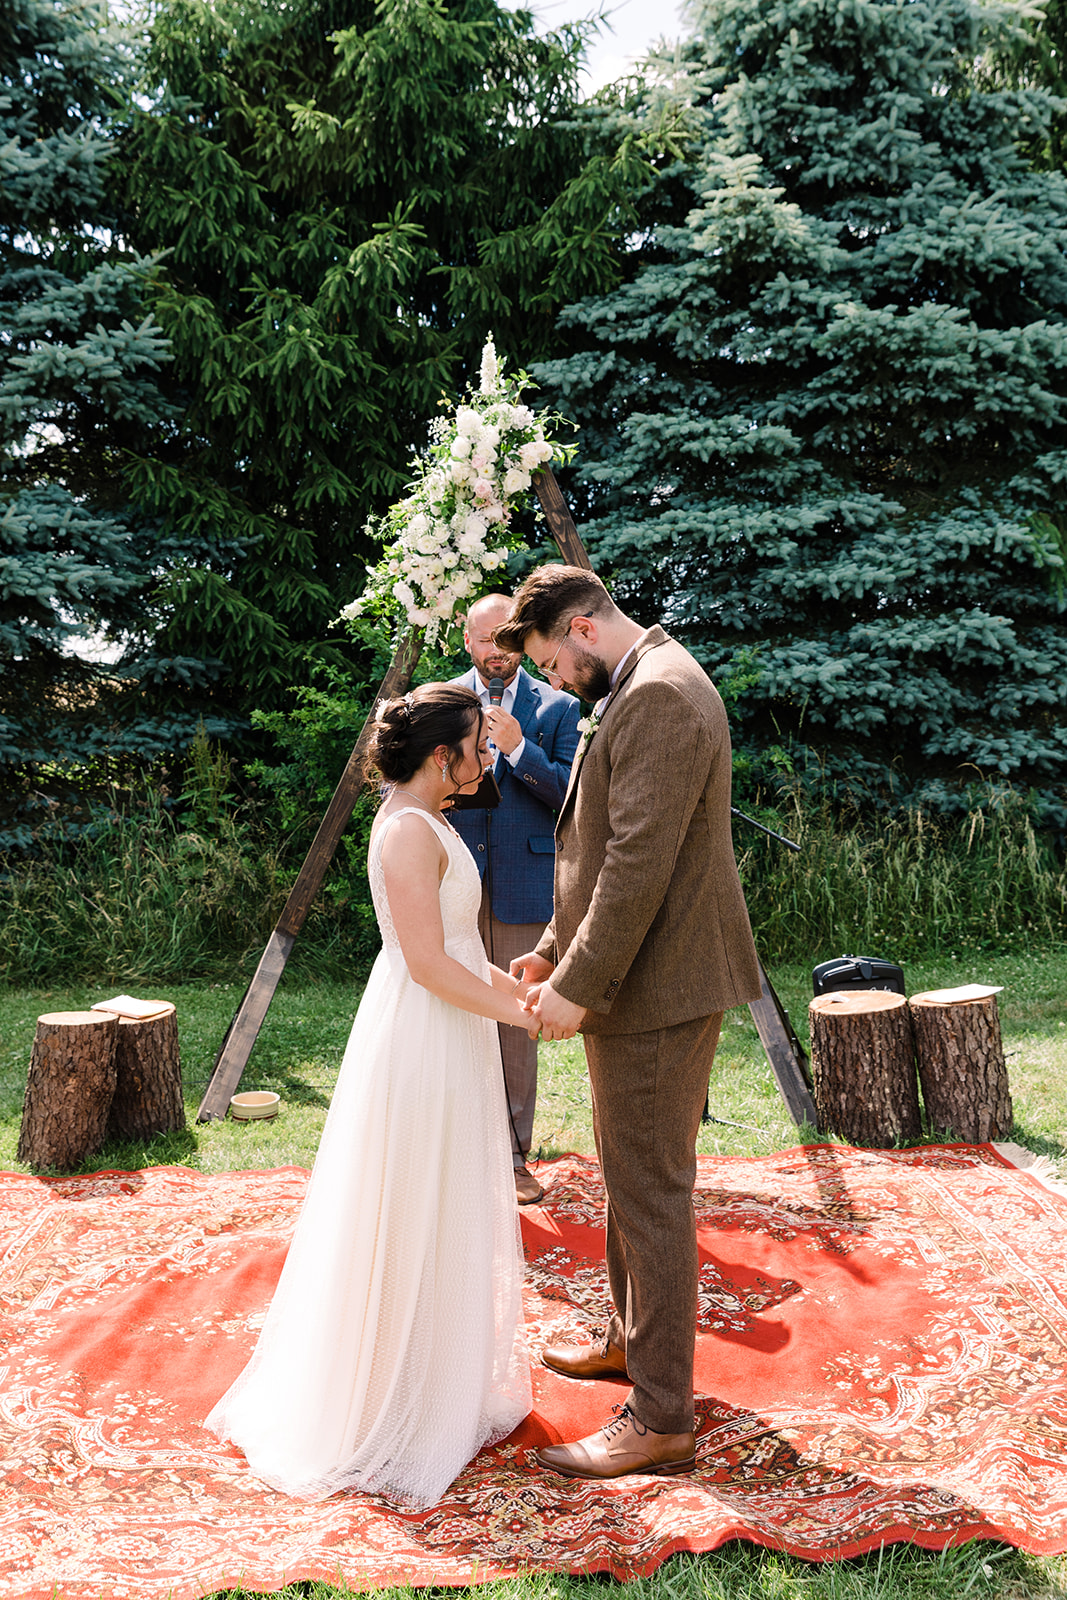 Northeast Ohio wedding on a gorgeous farm surrounded by pastures and so much nature